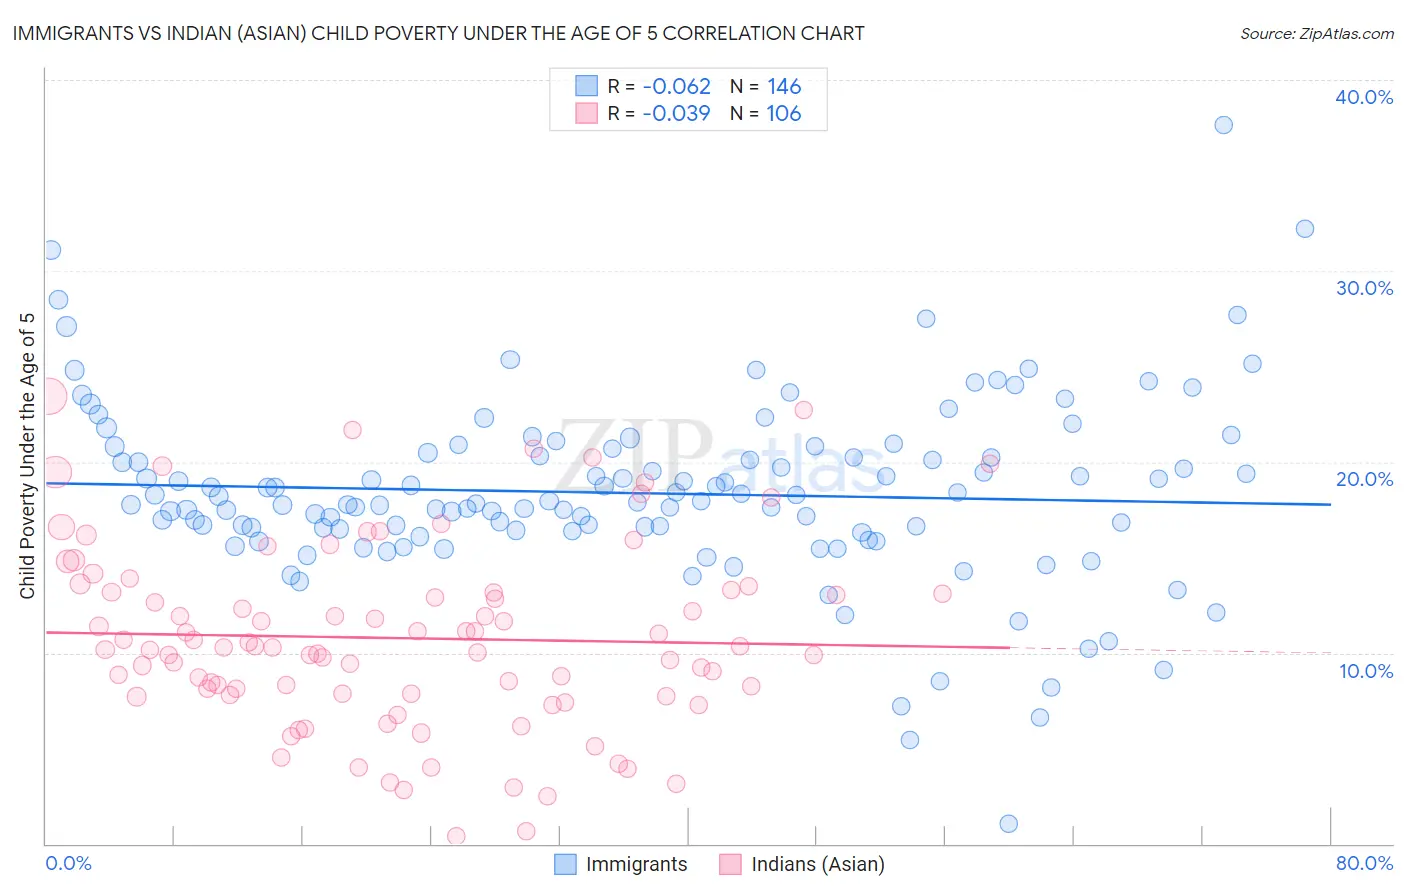 Immigrants vs Indian (Asian) Child Poverty Under the Age of 5